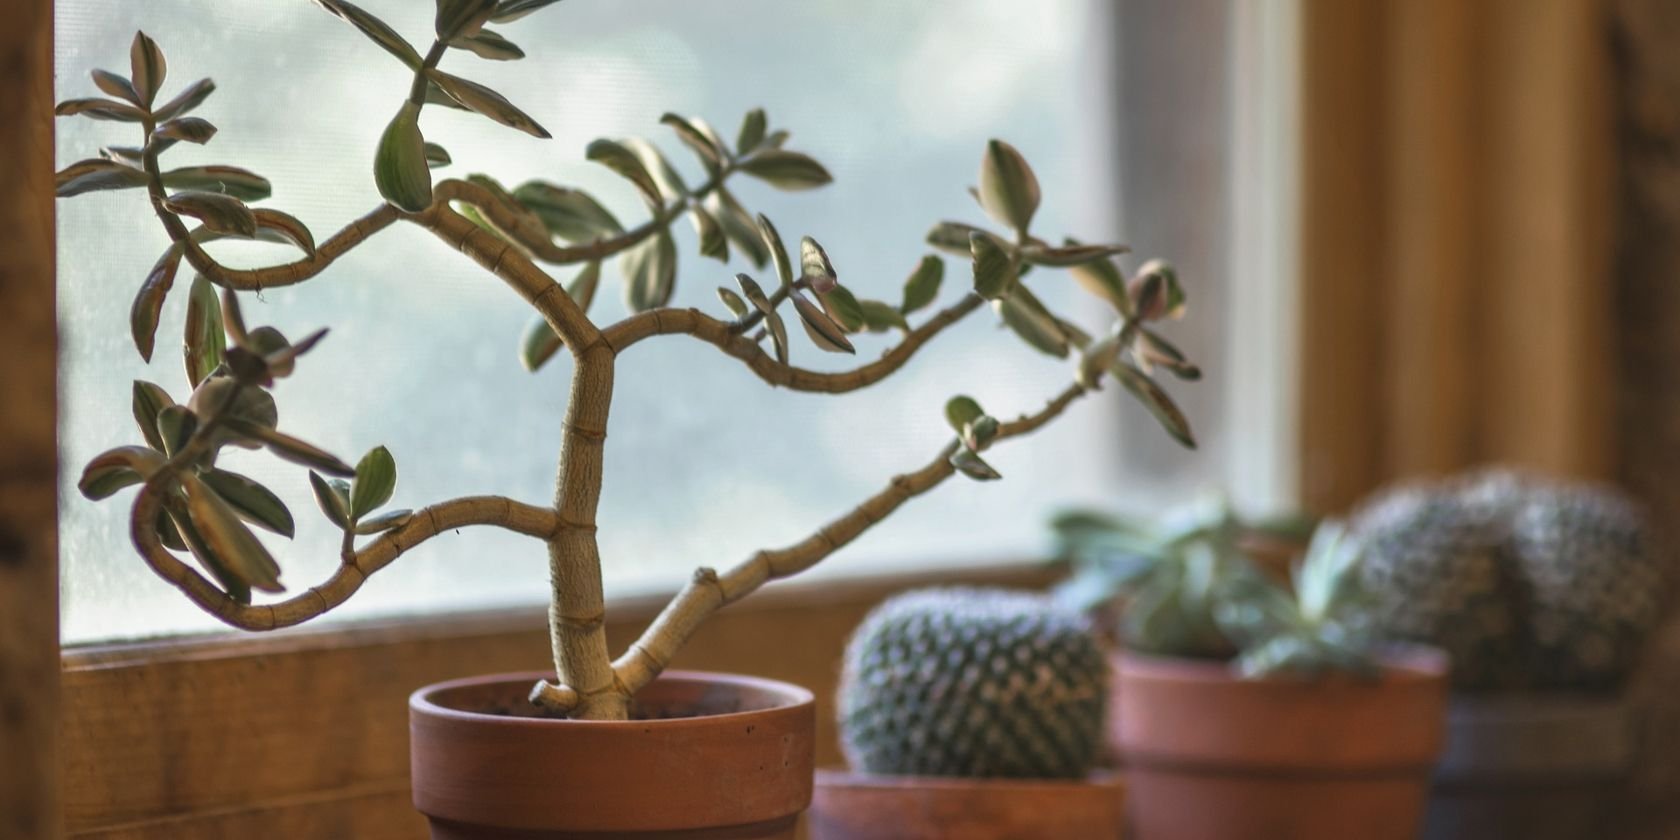 5 Sites That Can Help You With Houseplant Care